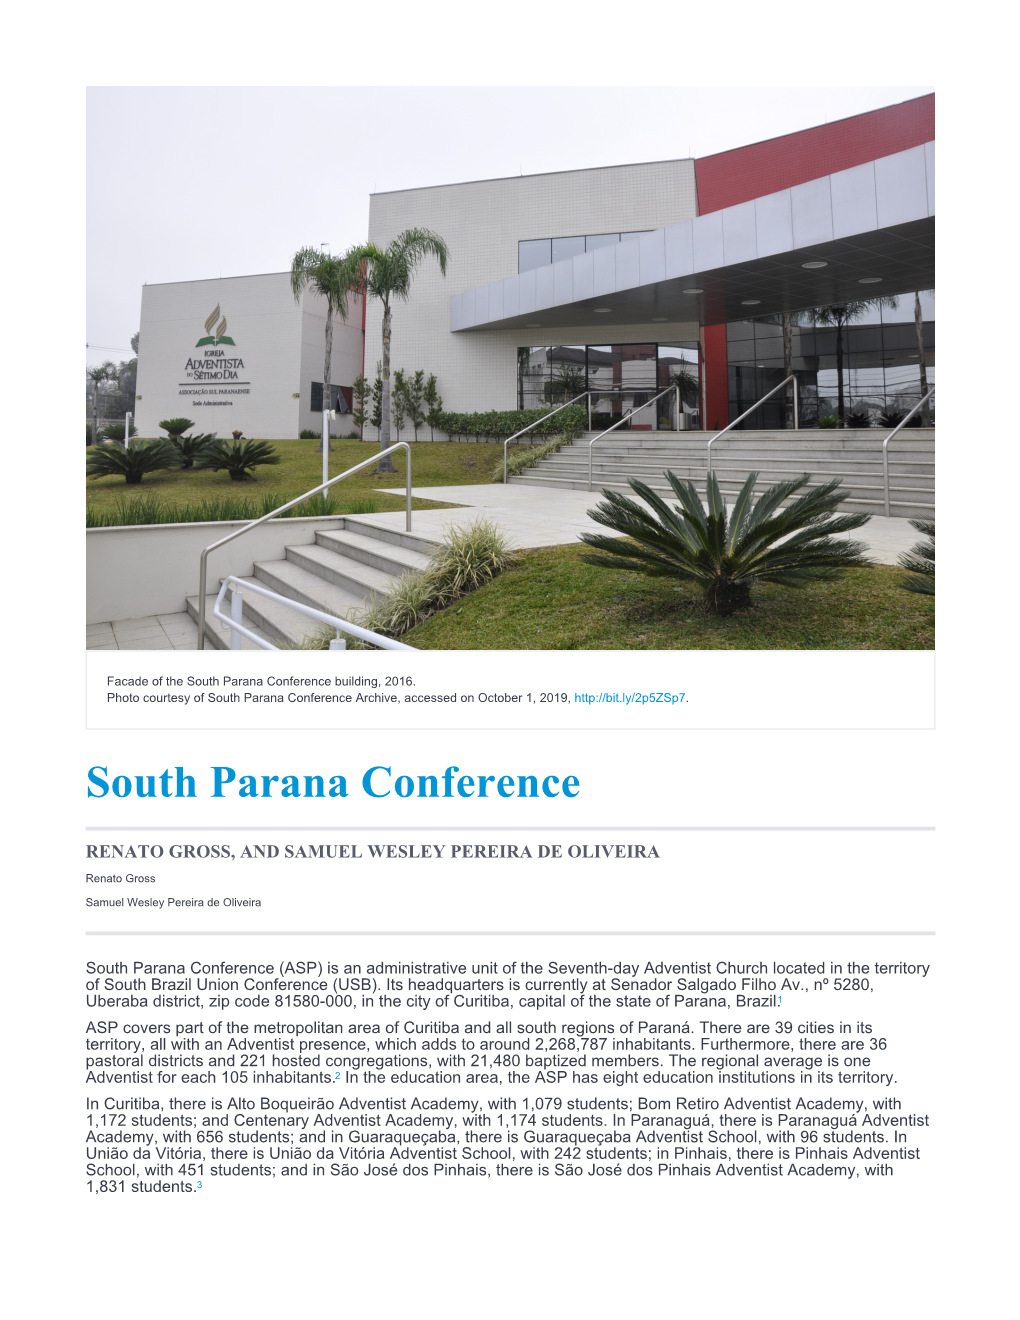 South Parana Conference Building, 2016